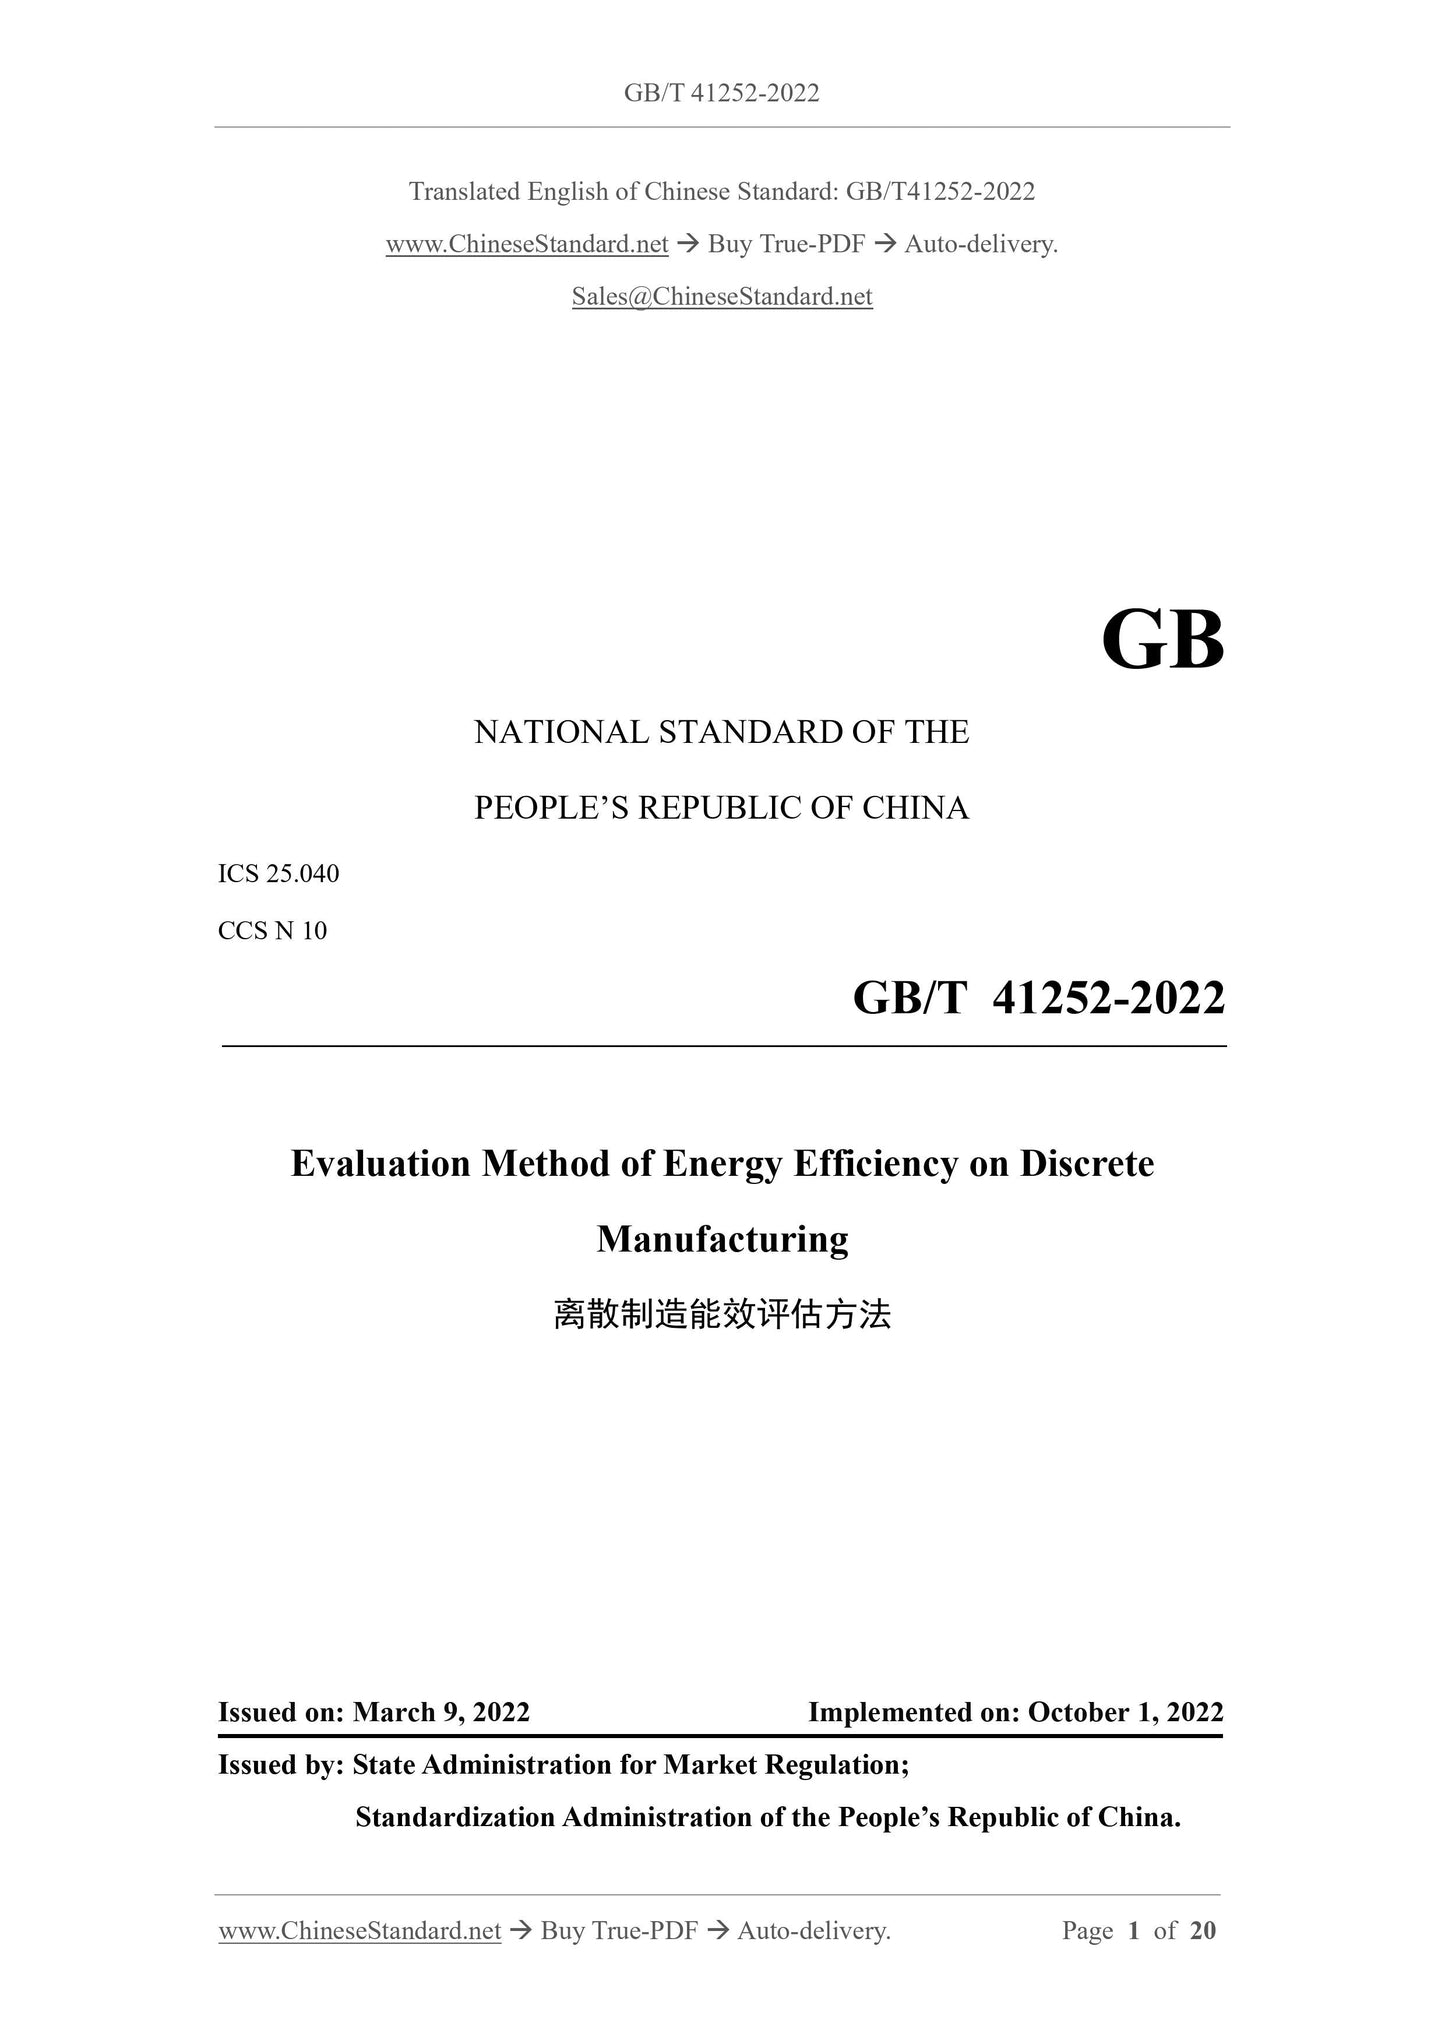 GB/T 41252-2022 Page 1